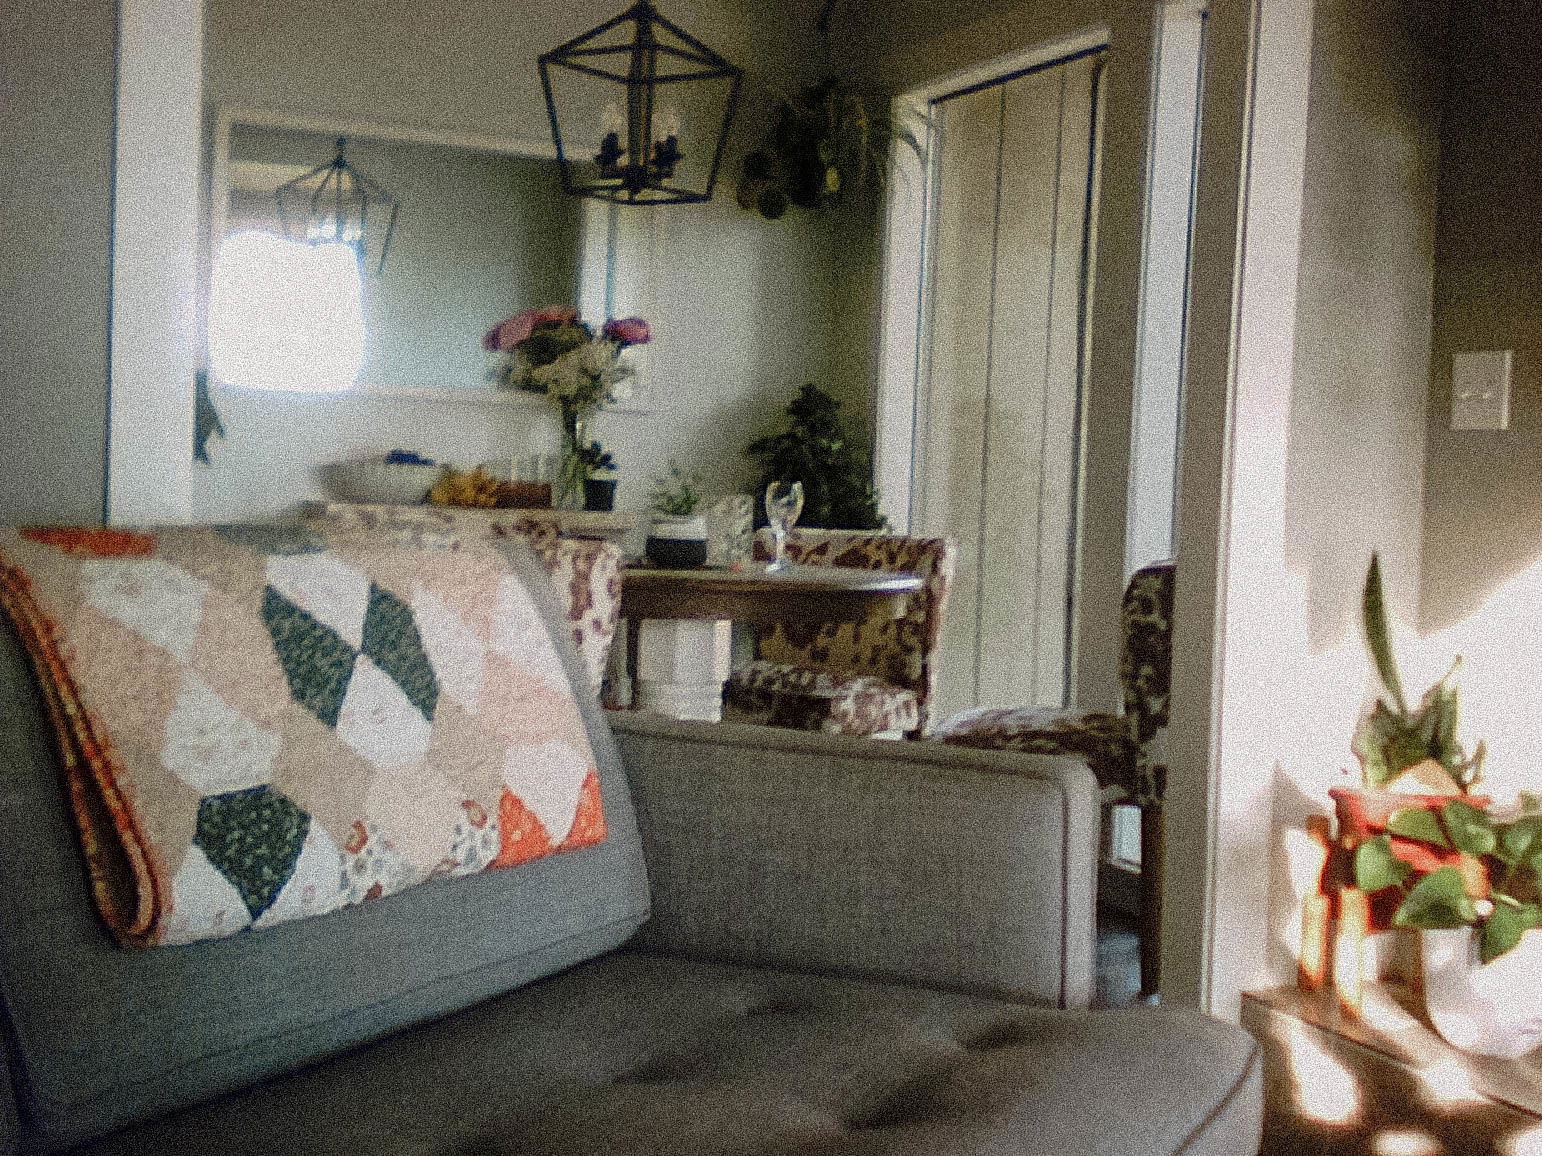 A cozy living room with a gray couch and a colorful quilt, facing a dining area with flowers on the table and pendant lights, and a glimpse of sunlight shining on plants near the doorway.